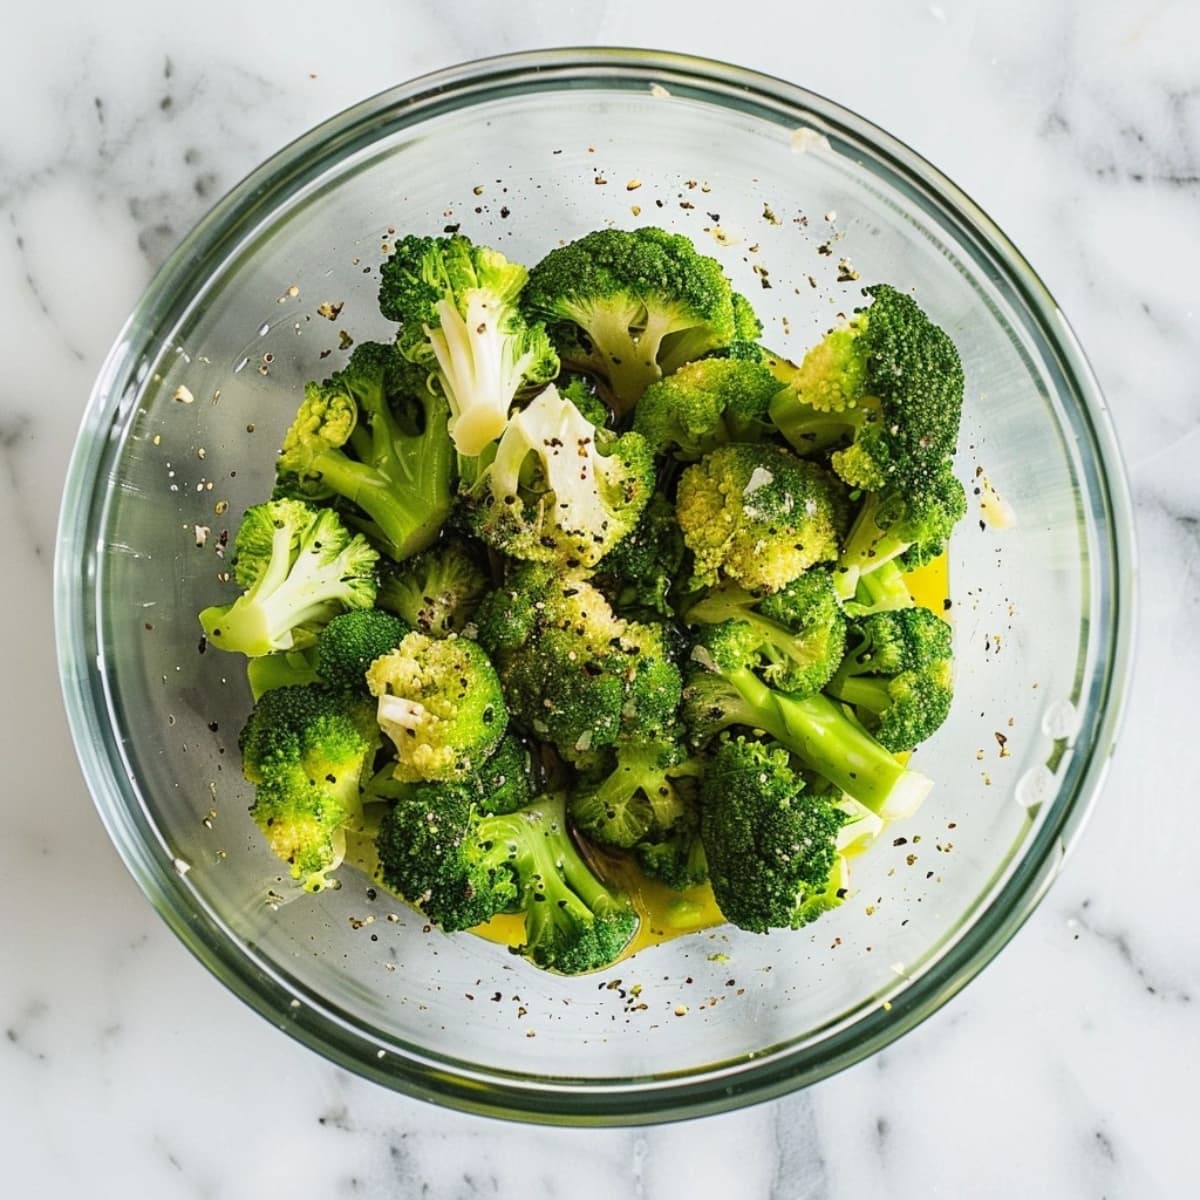 Broccoli florets seasoned with salt, pepper and olive oil in a glass bowl.